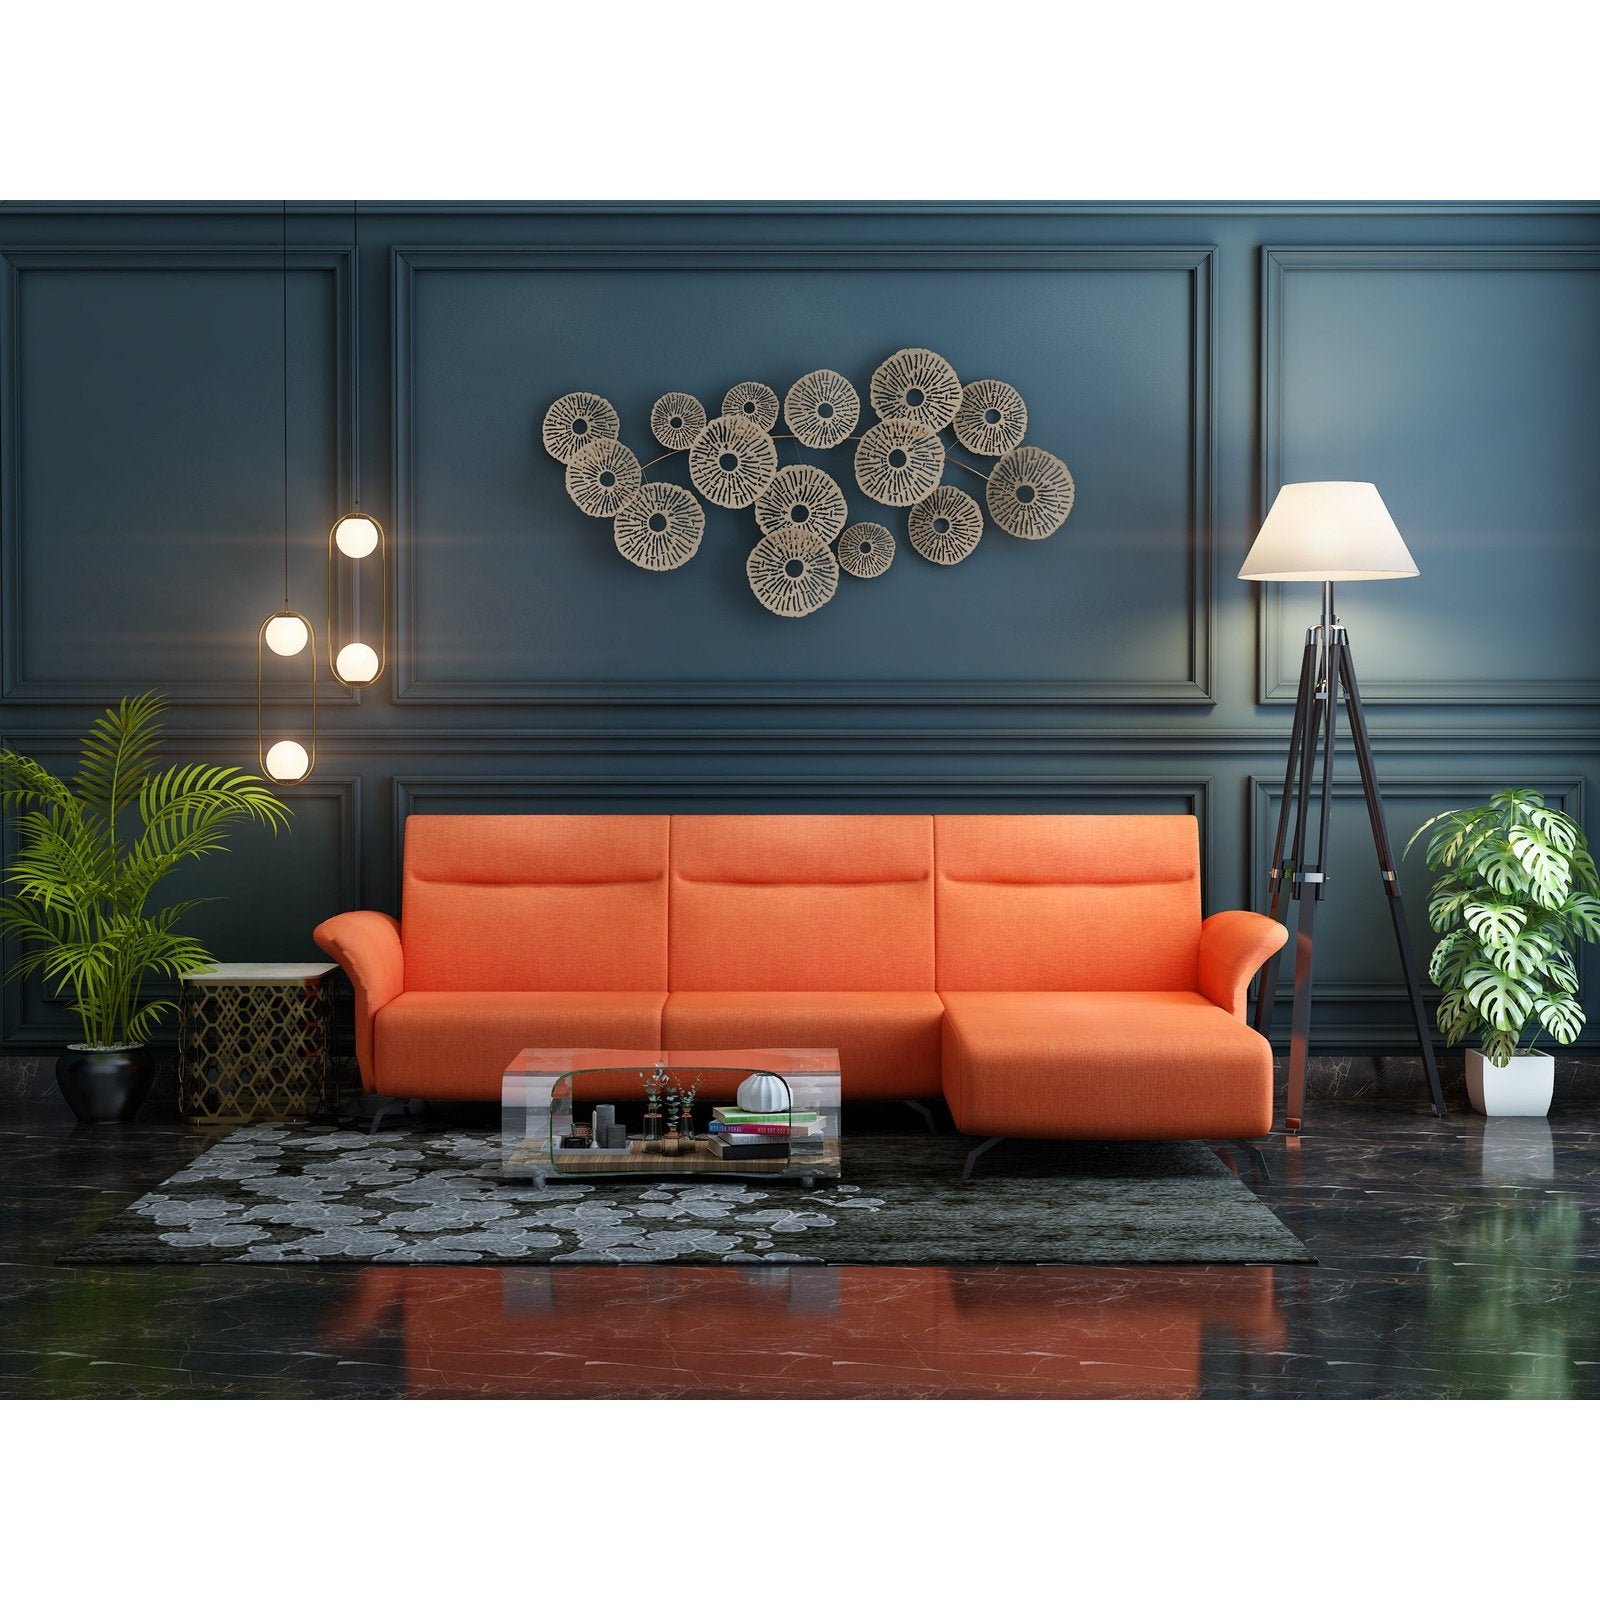 1408800 Sofa Stock Photos Pictures  RoyaltyFree Images  iStock  Sofa  isolated Old couch Living room